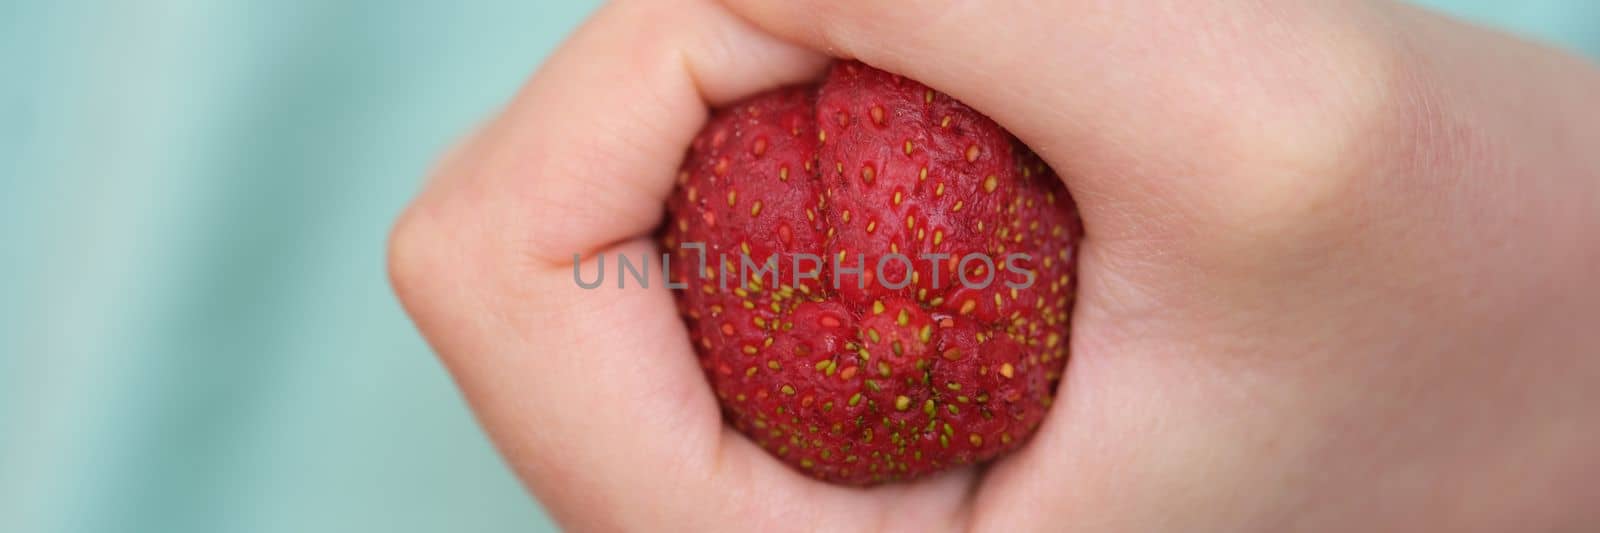 Clenched strawberries in fist in form of constipation of colon. Hemorrhoids acute symptoms and treatment